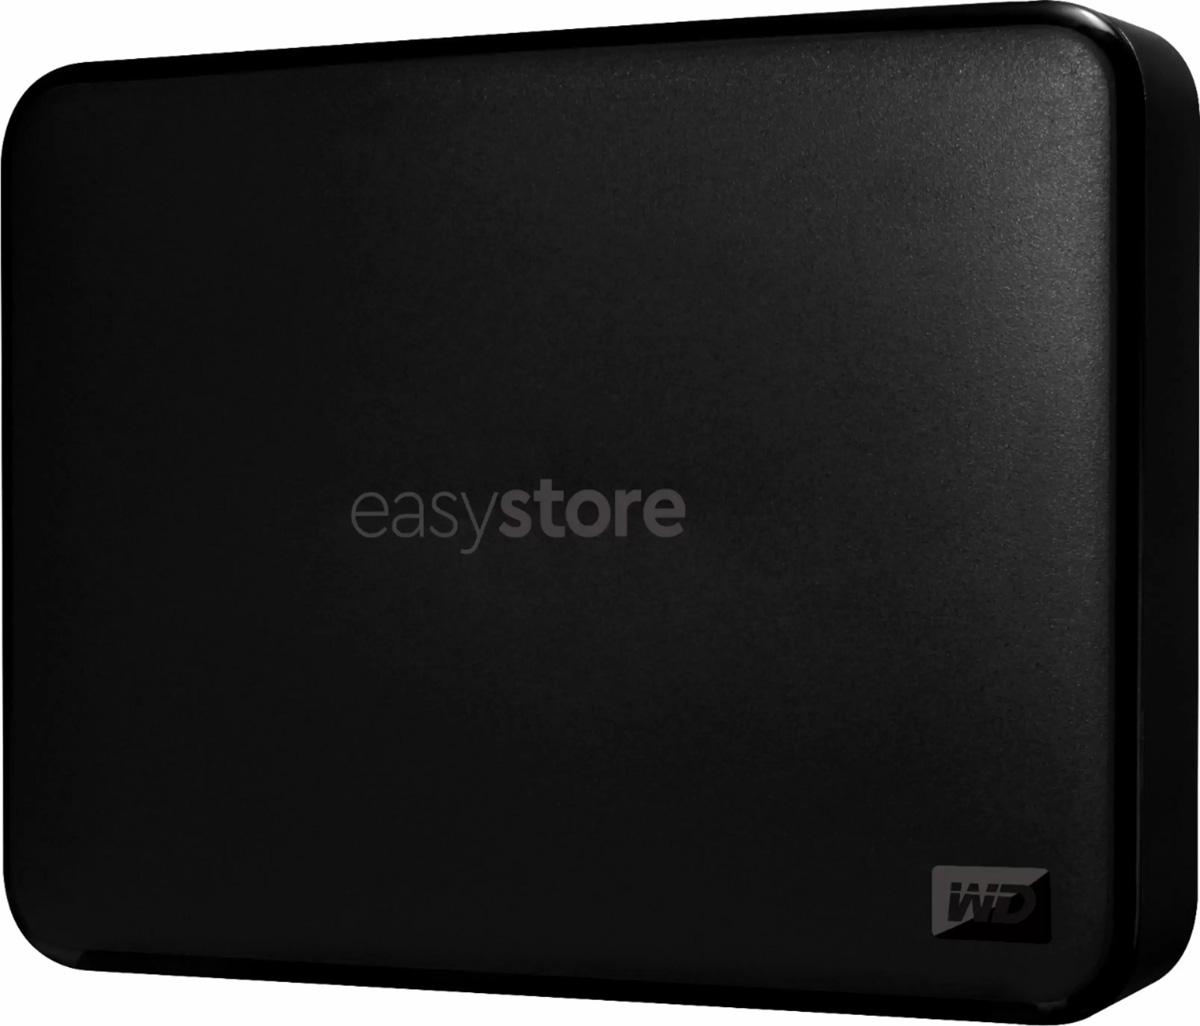 WD Easystore 4TB External USB 3.0 Portable Hard Drive for $89.99 Shipped